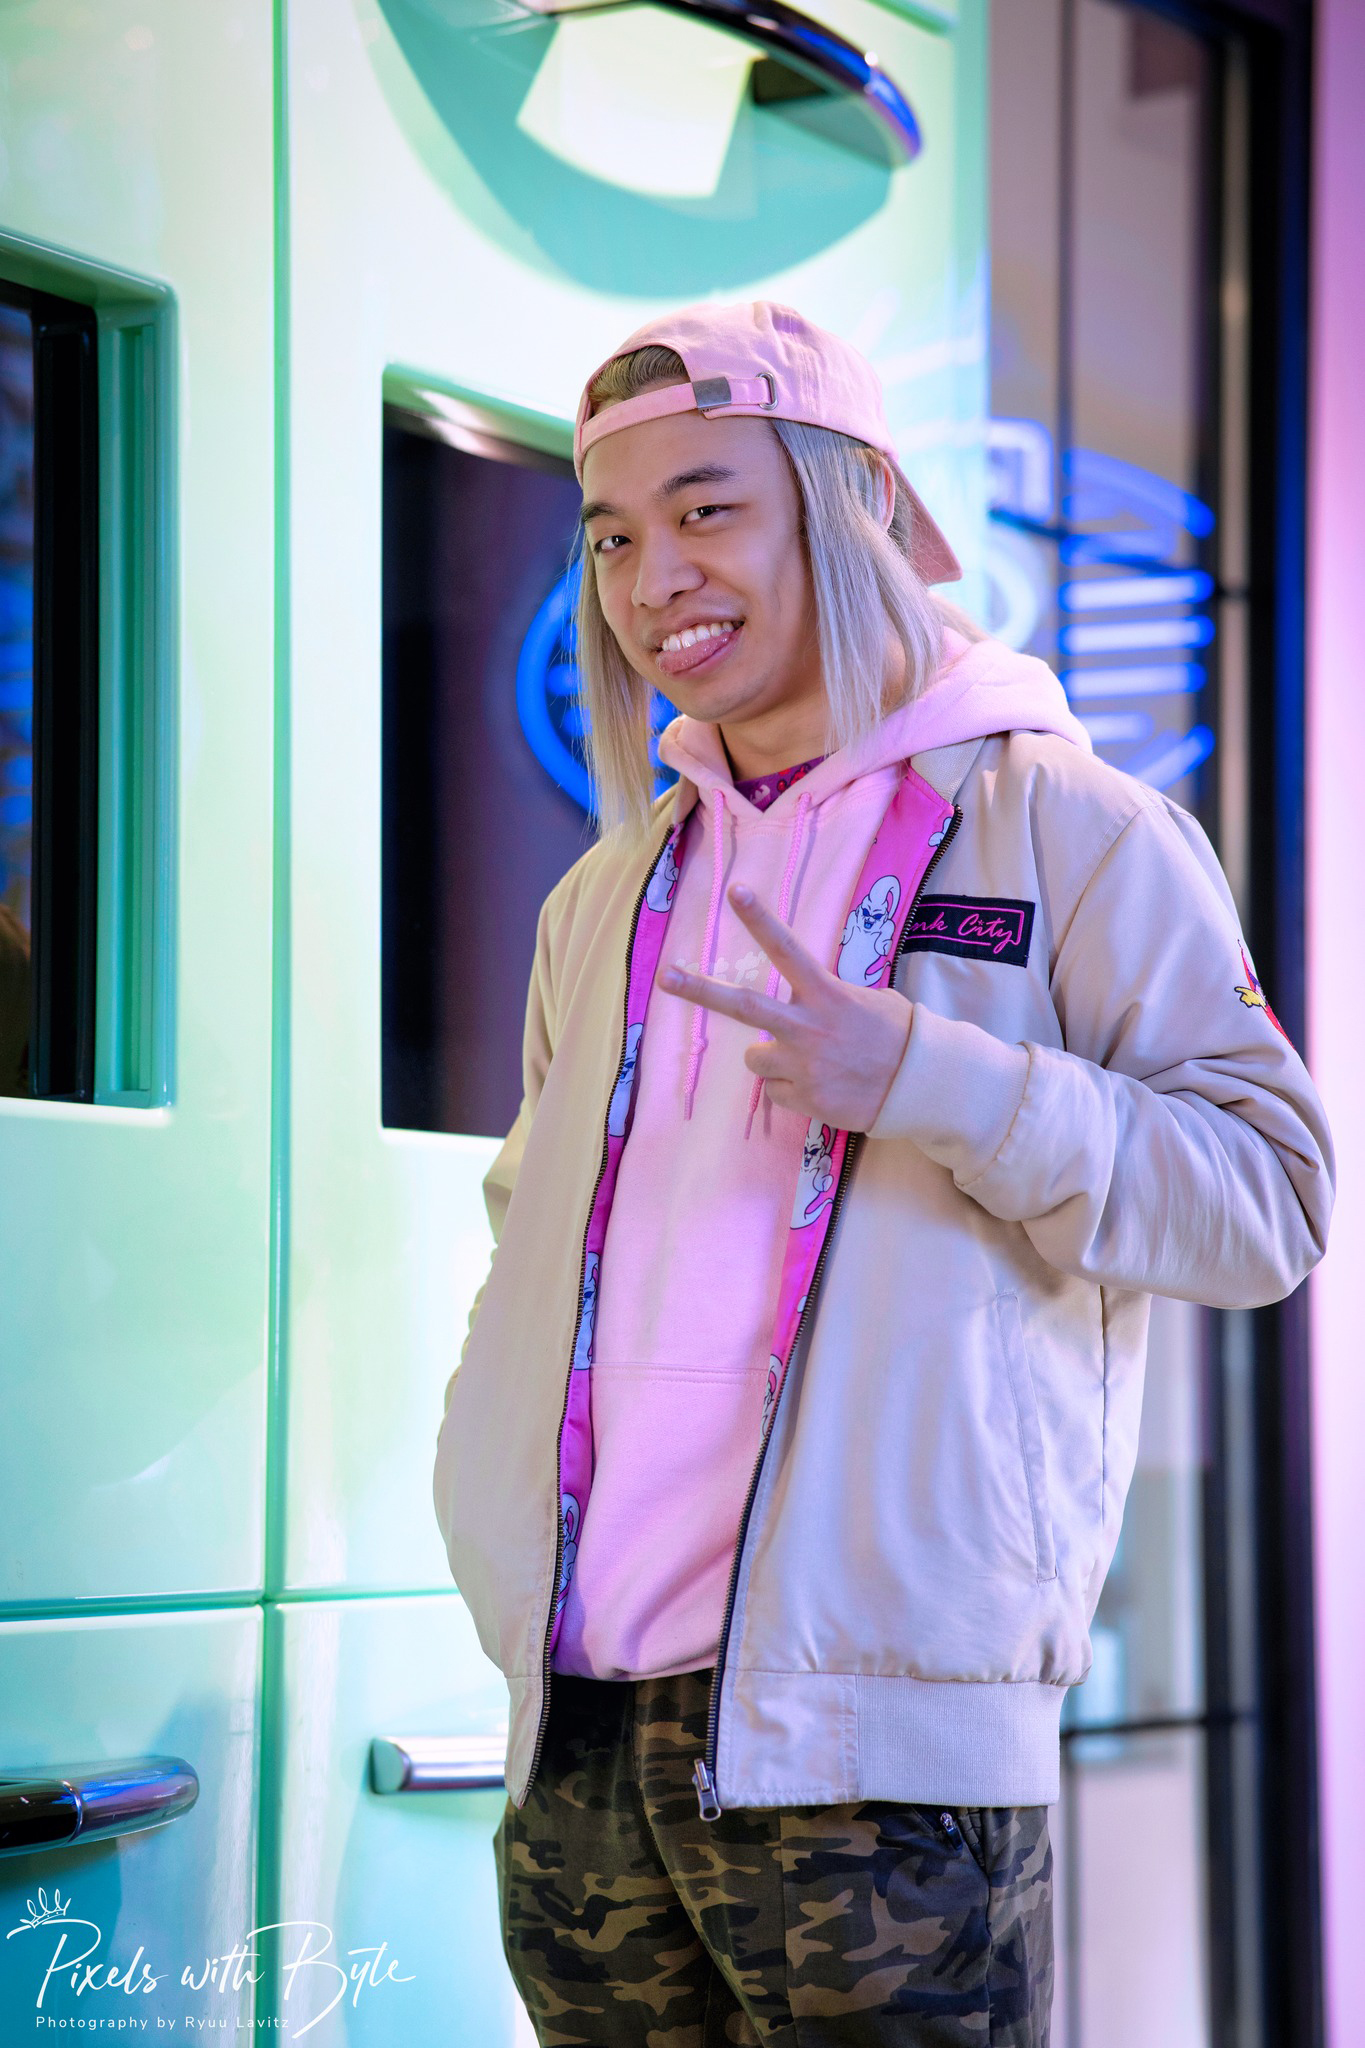 Chris Tung, in a vibrant pink Pink City branded hoodie, flashes a casual smile with a reverse peace sign